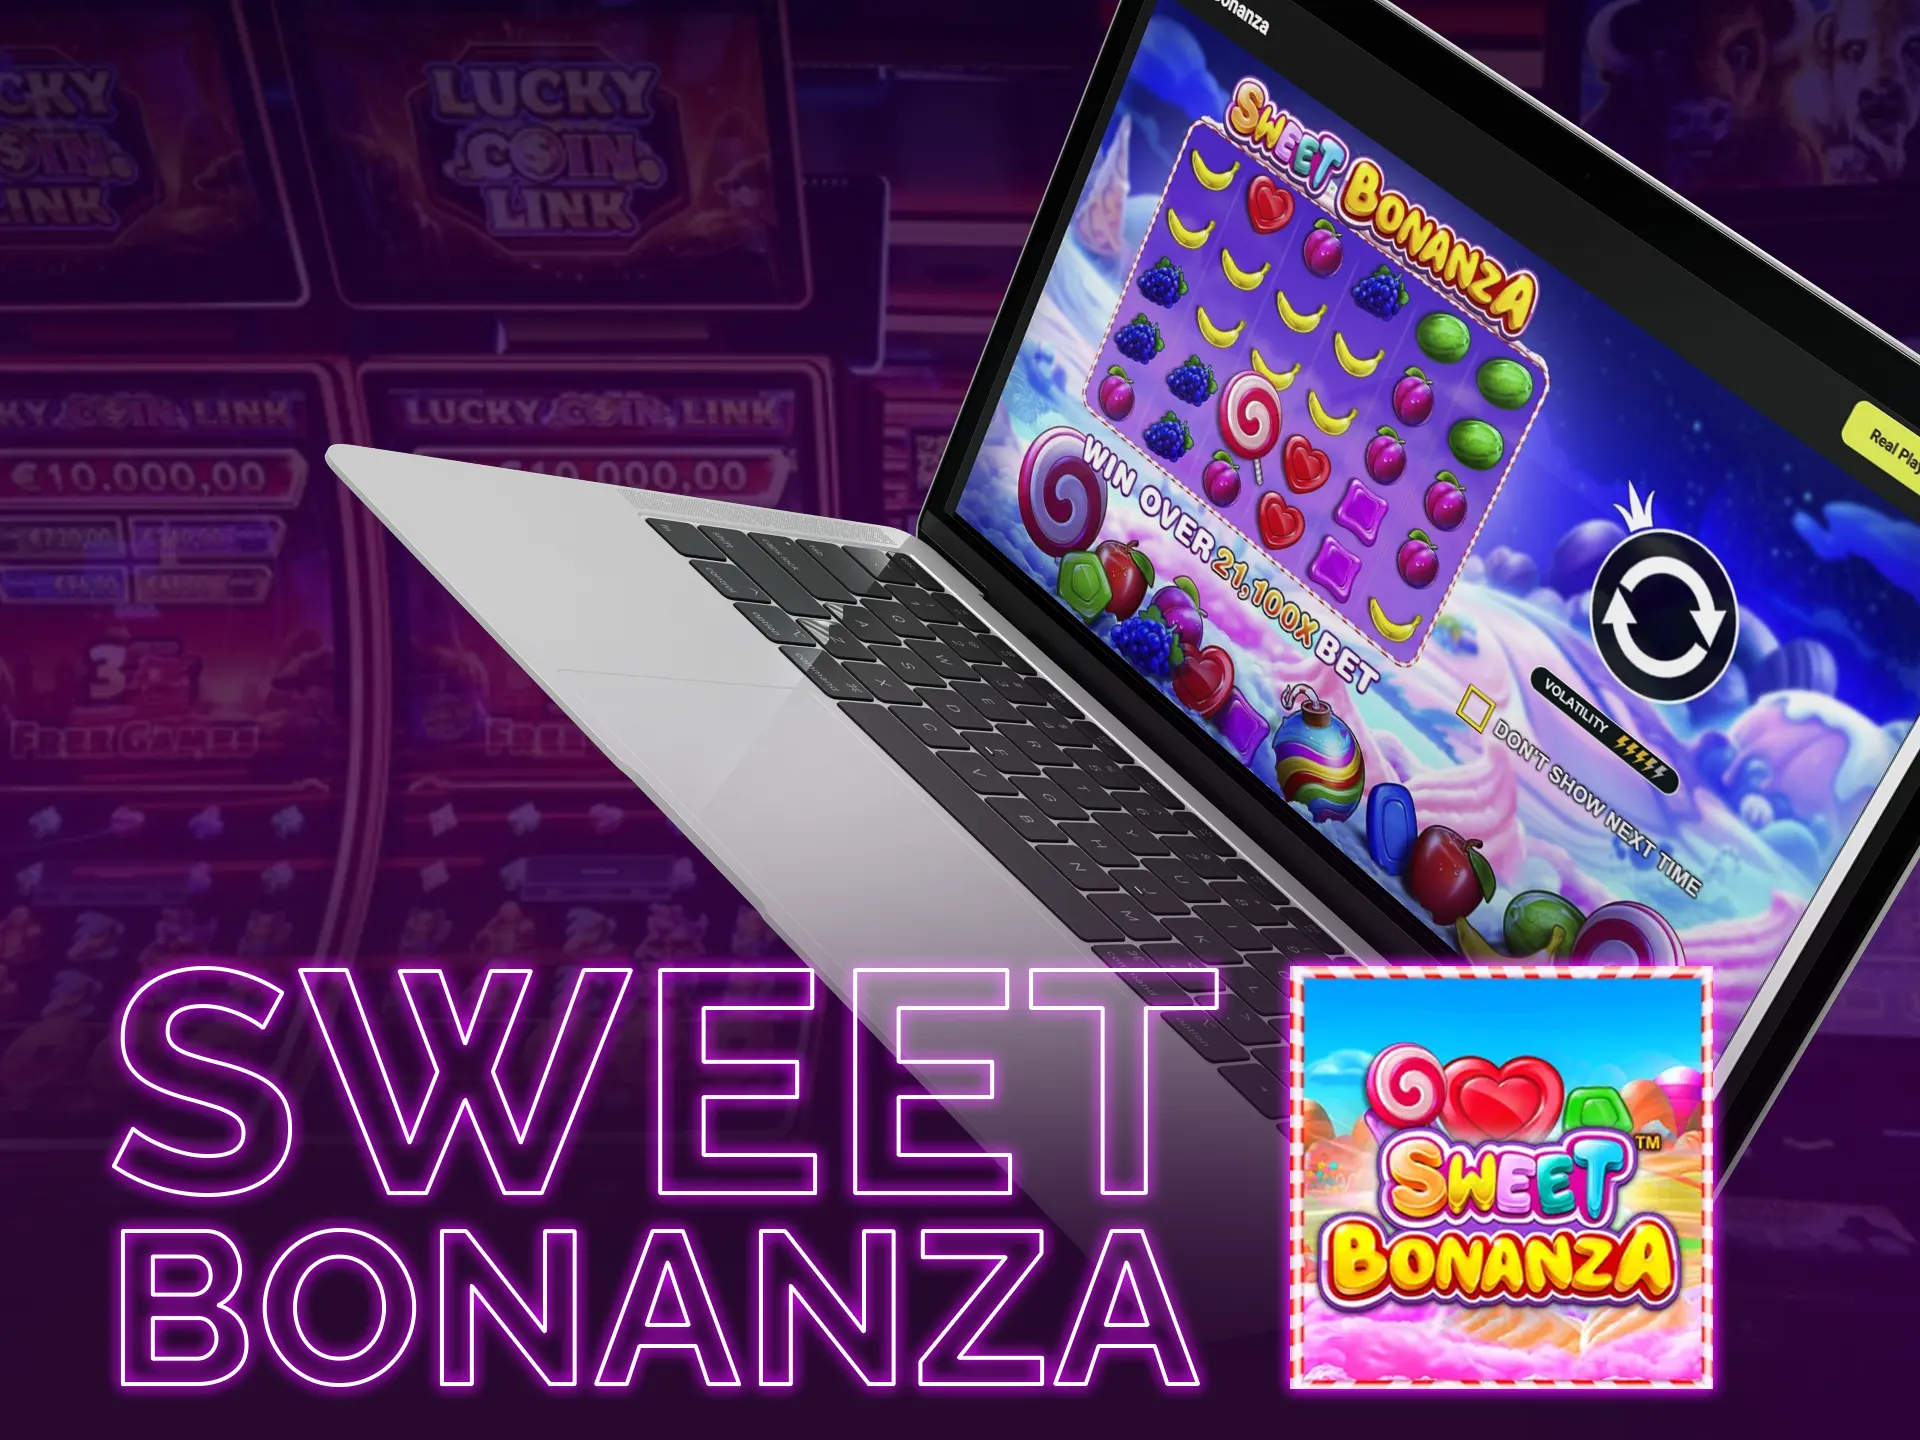 The colorful Sweet Bonanza slot provides a unique gaming experience.